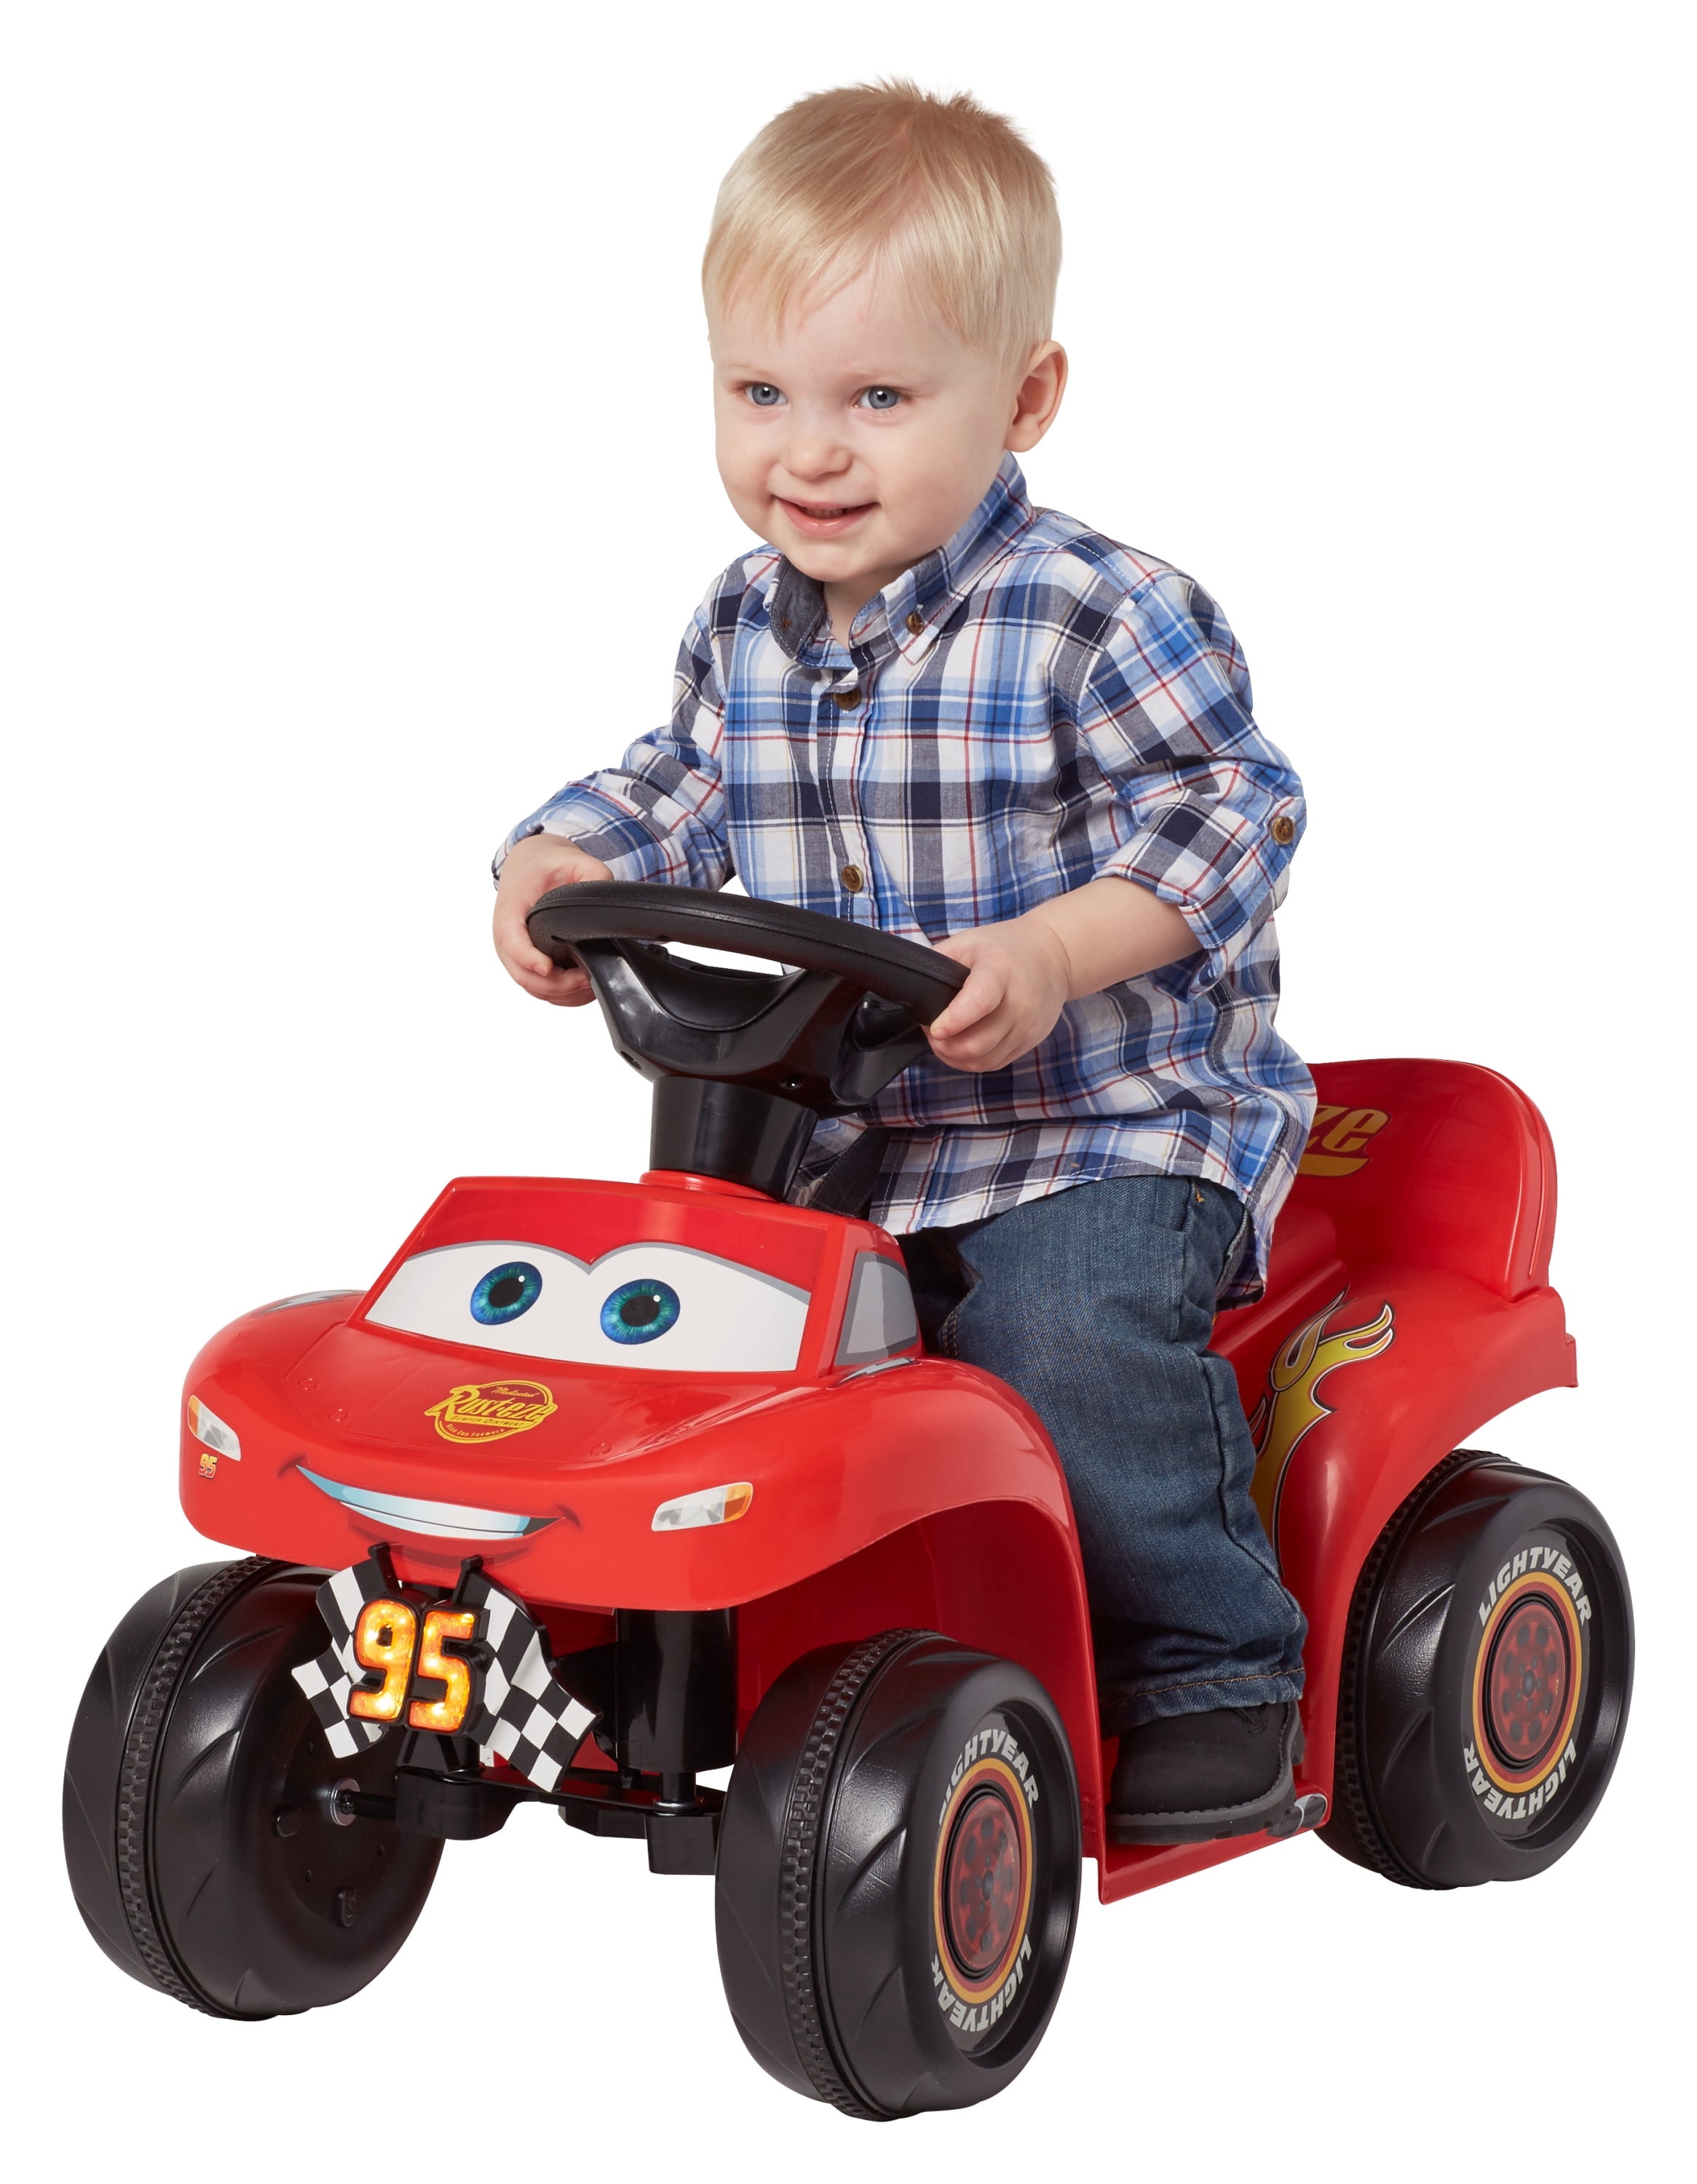 NEW Lightning McQueen Ride-On WITH TRACK INCLUDED GIFT BOXED 